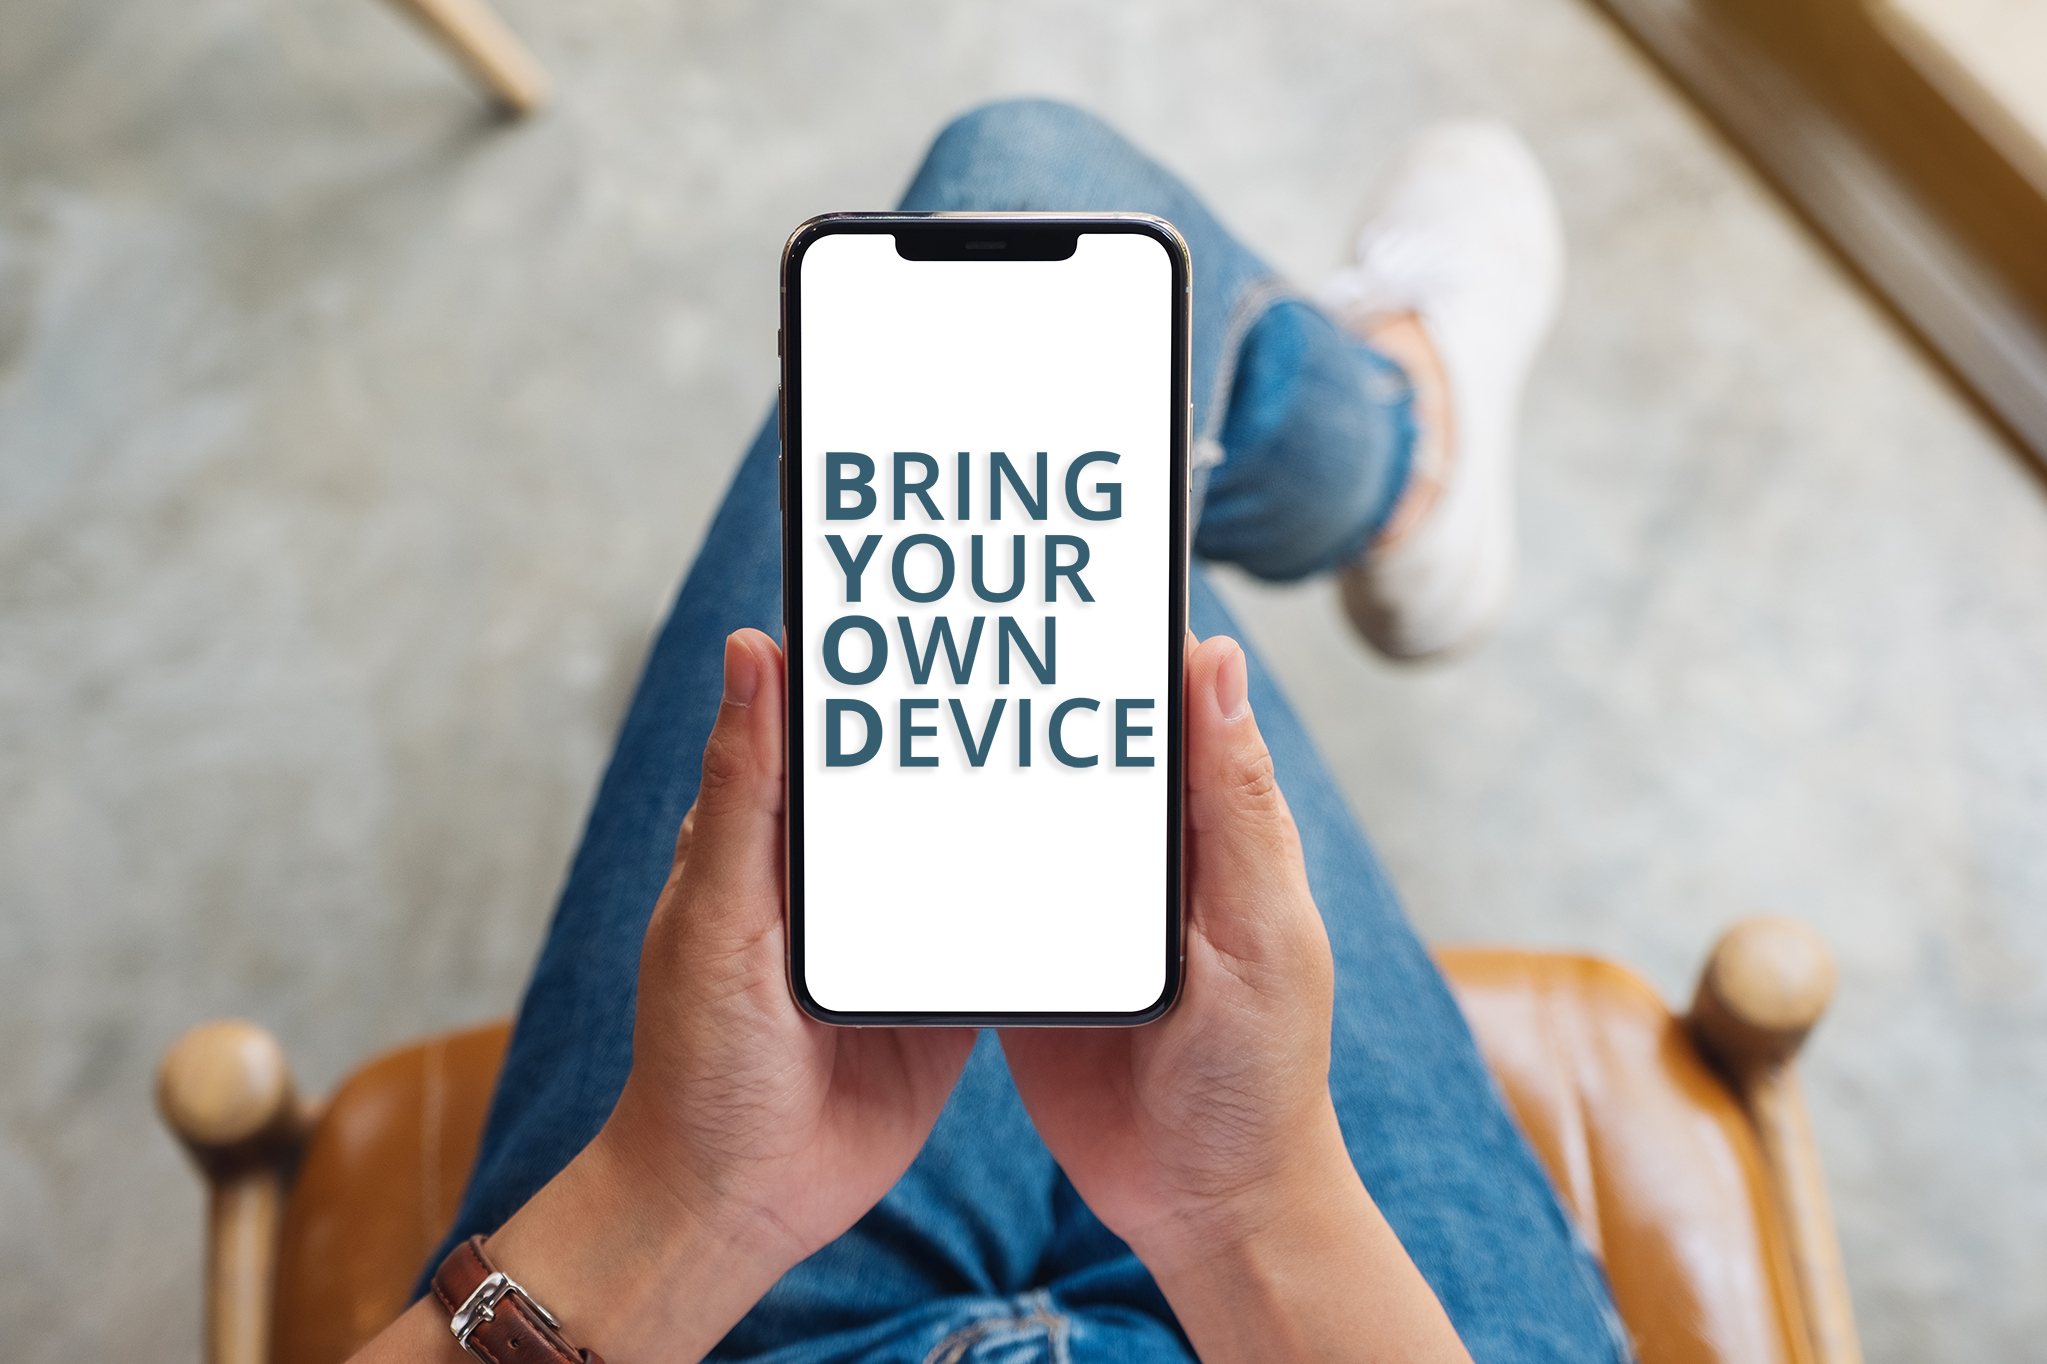 Top view mockup image of a woman holding mobile phone with blank white screen